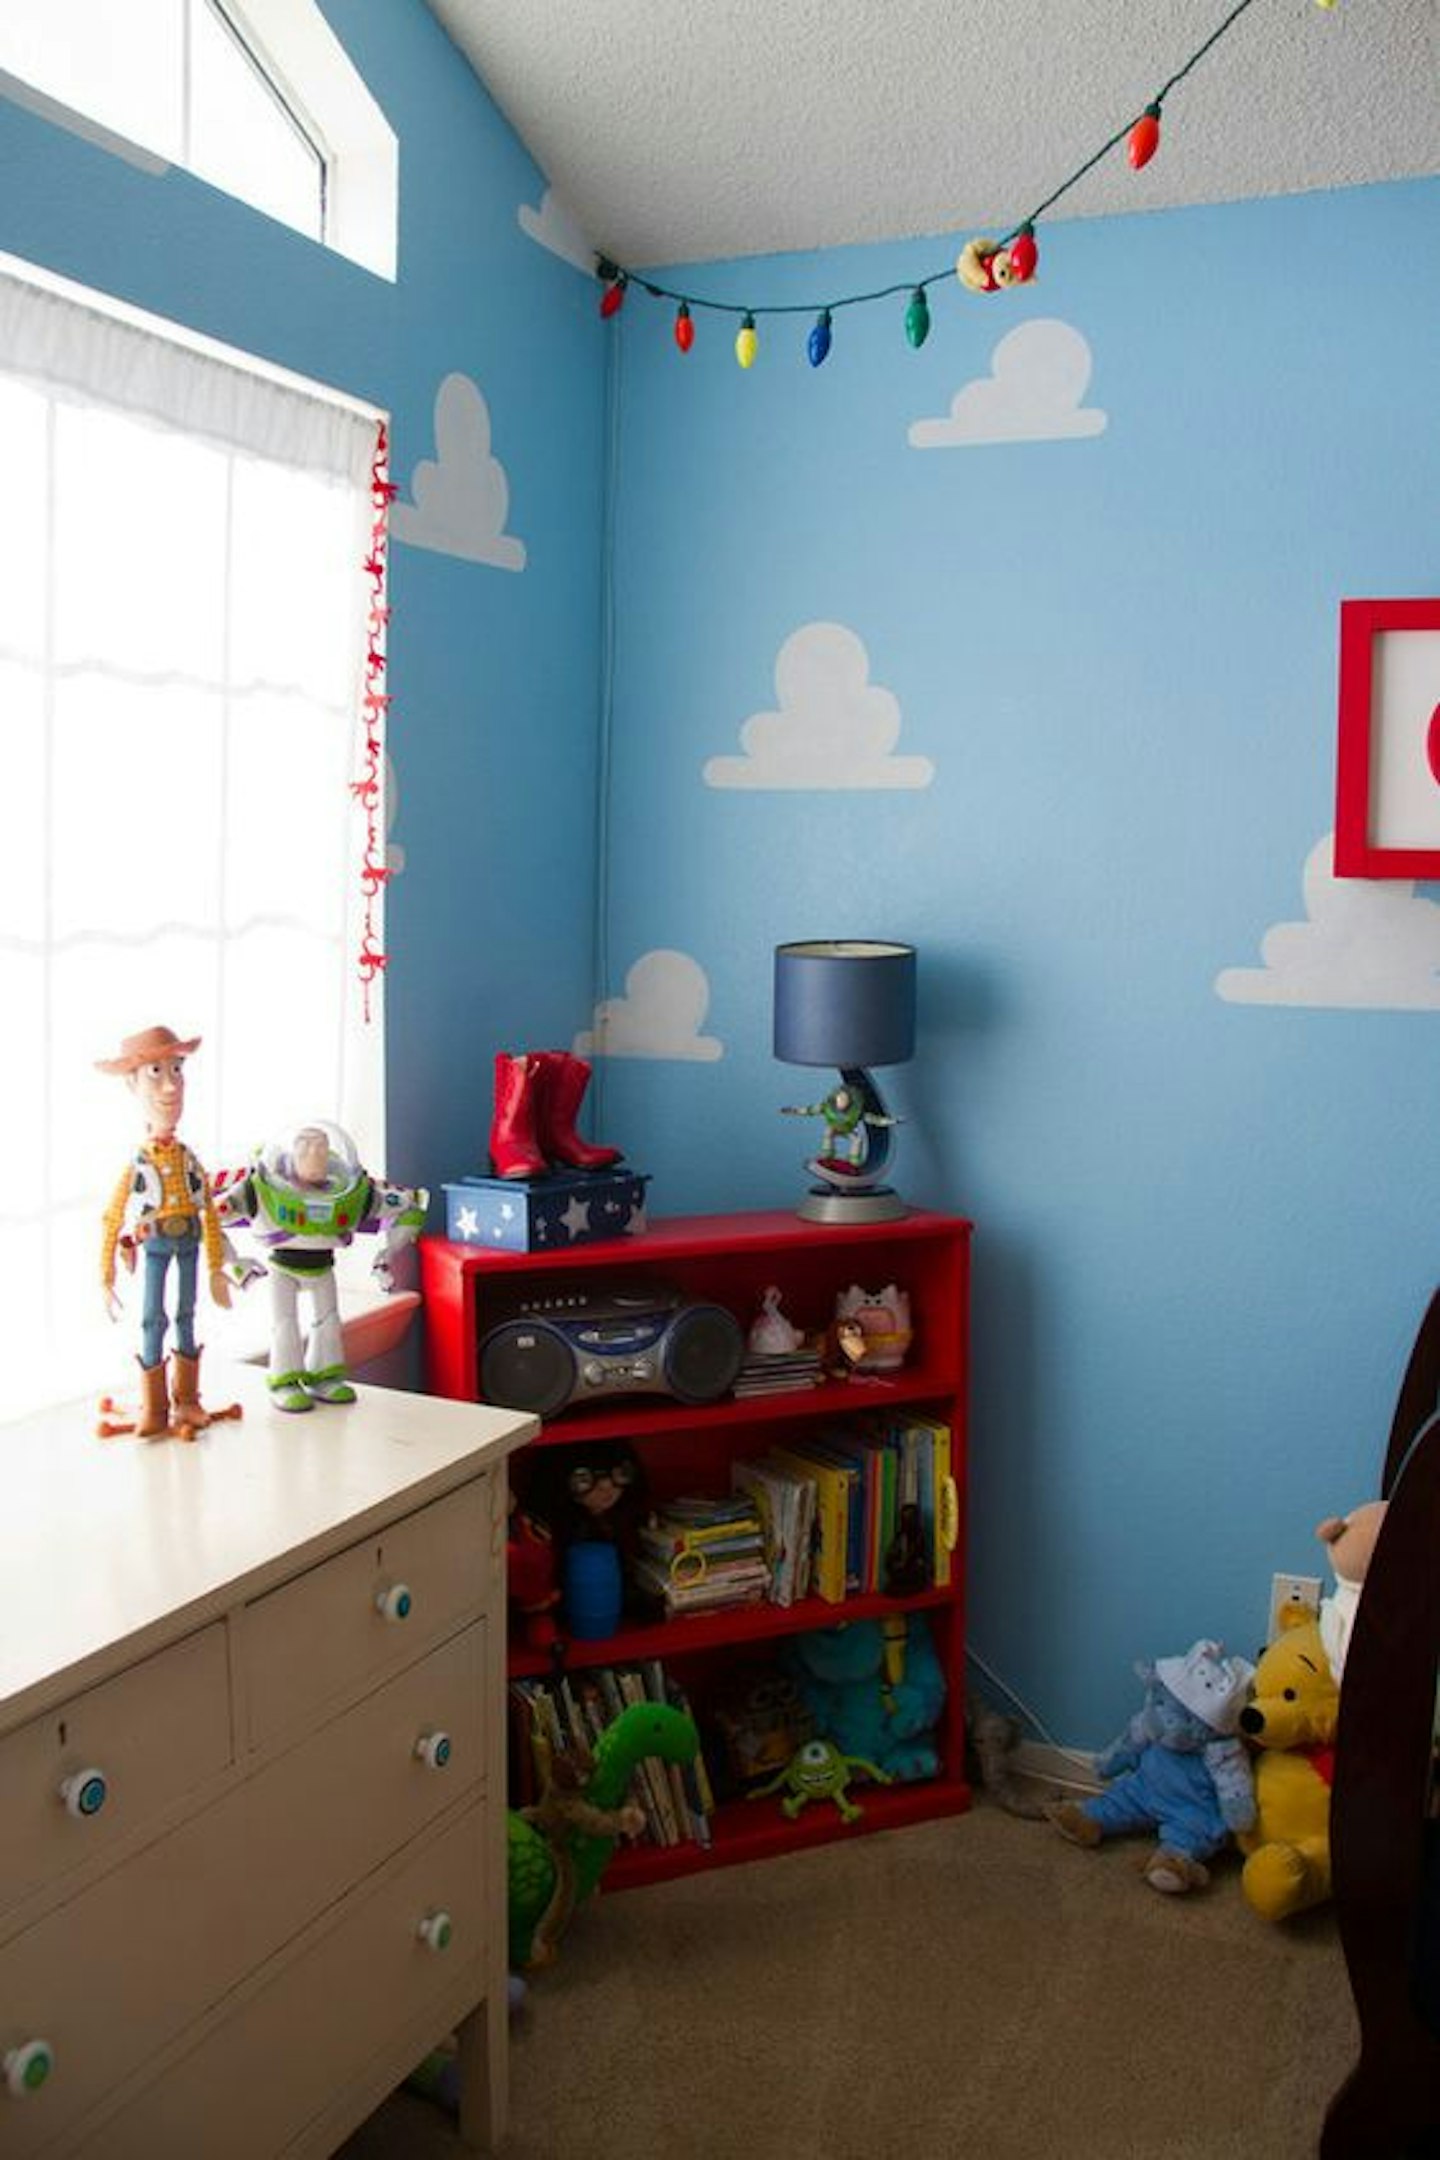 Toy story bedroom